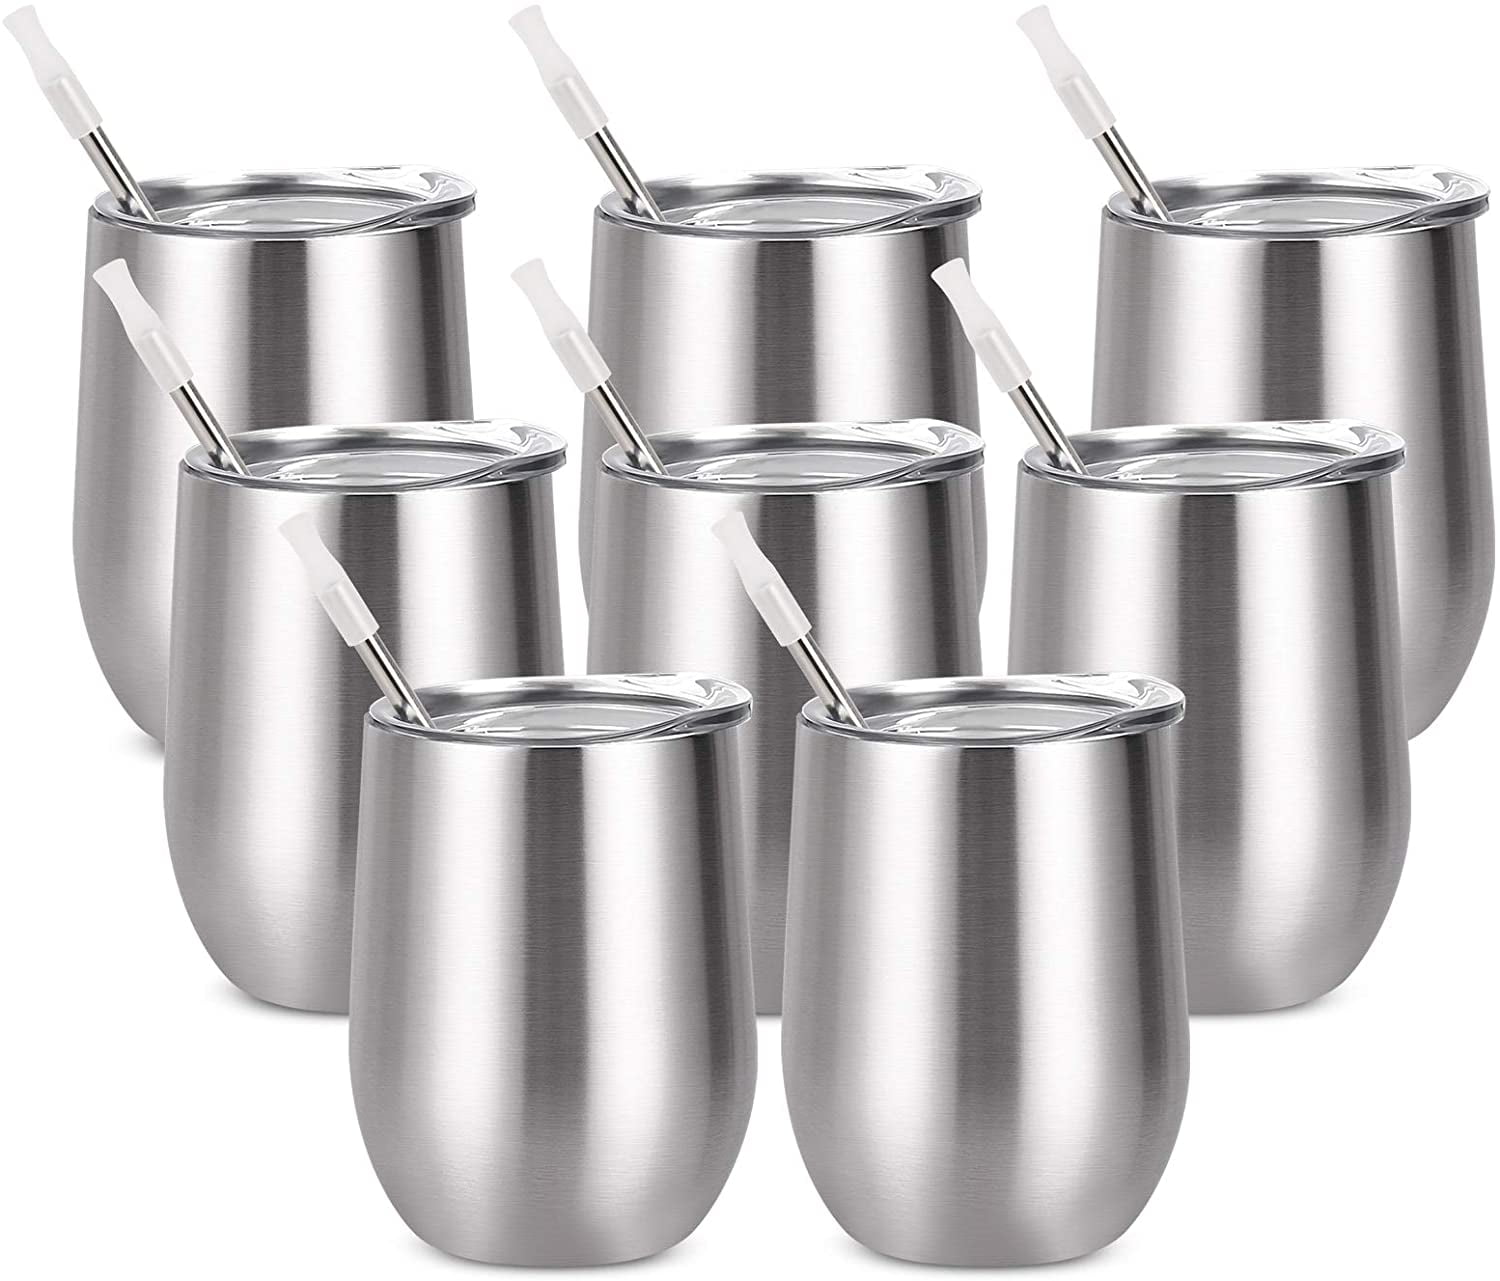 Gingprous 6 Pack 12 oz Stainless Steel Wine Tumblers with Lids Straws ,V  acuum Insulated Tumblers , Silver 